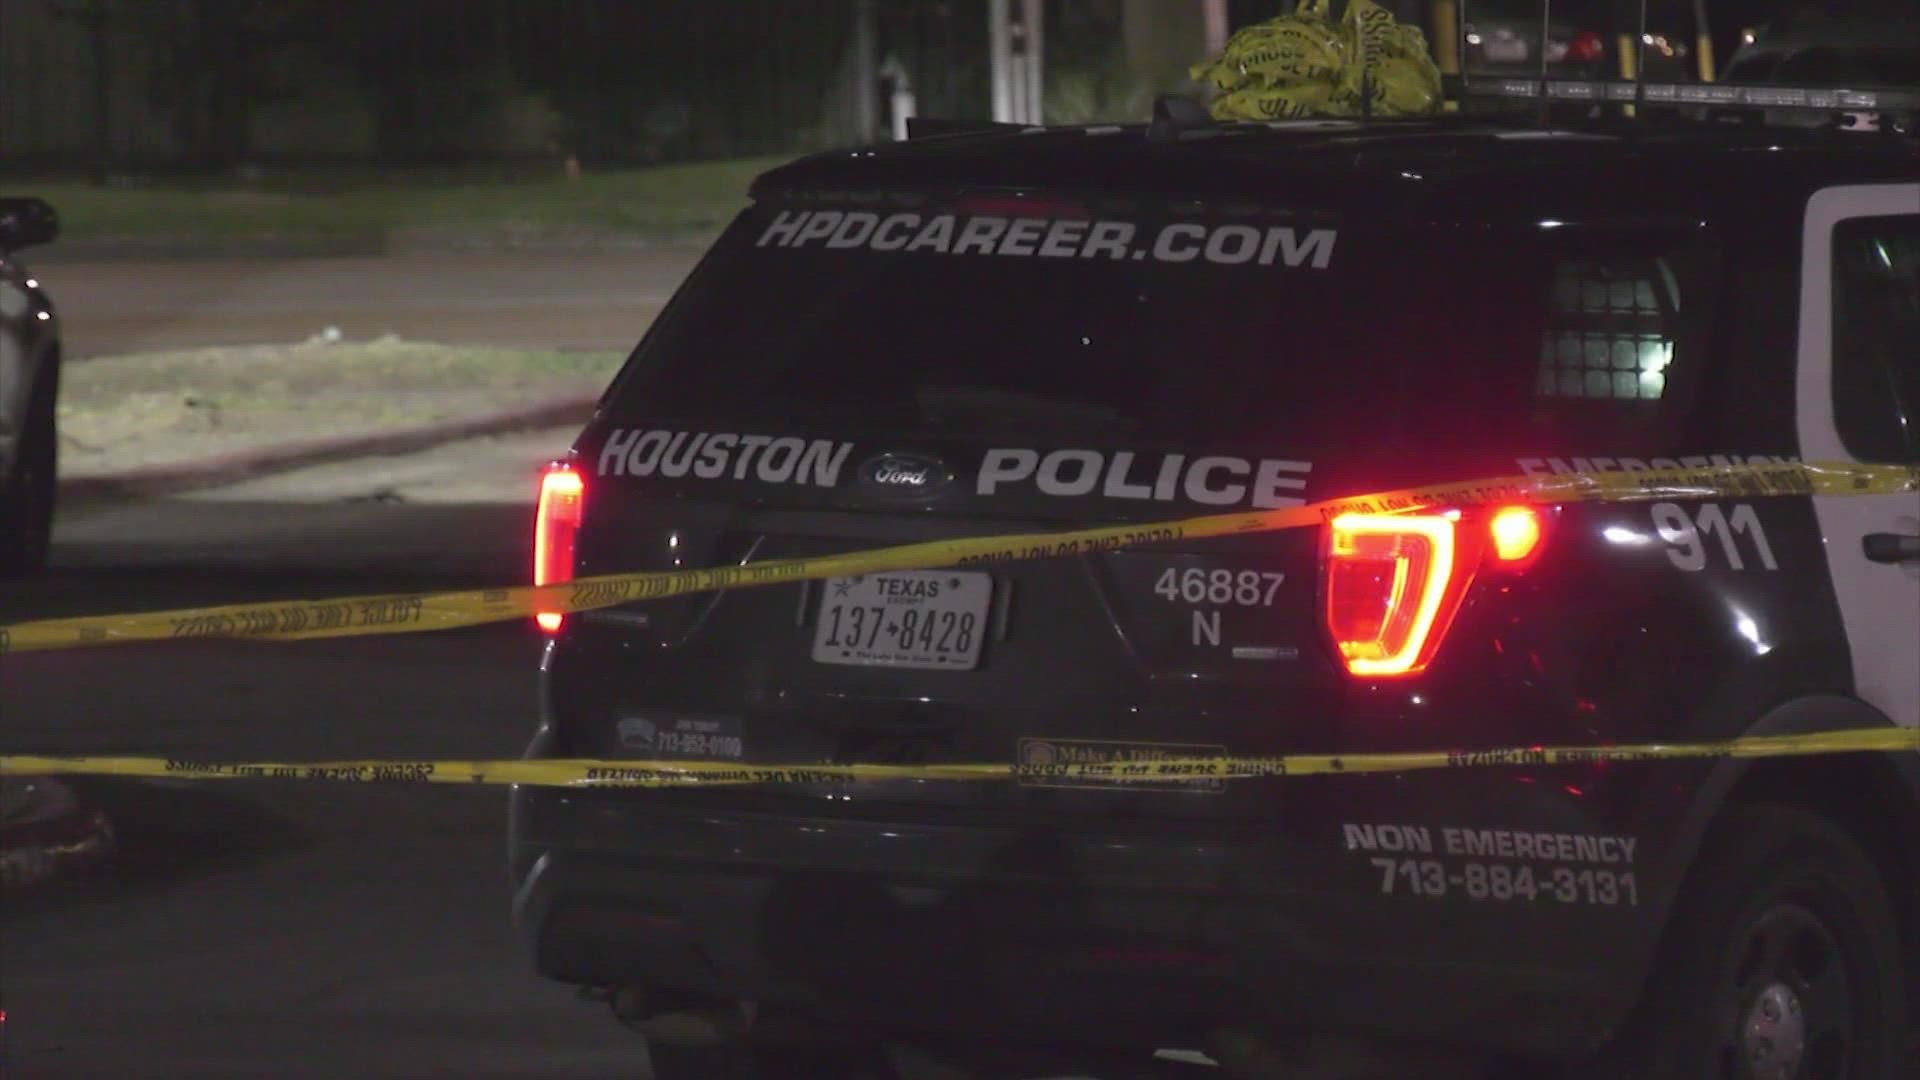 As the man approached the suspects, one came out from under his truck and shot him, according to the Houston Police Department.